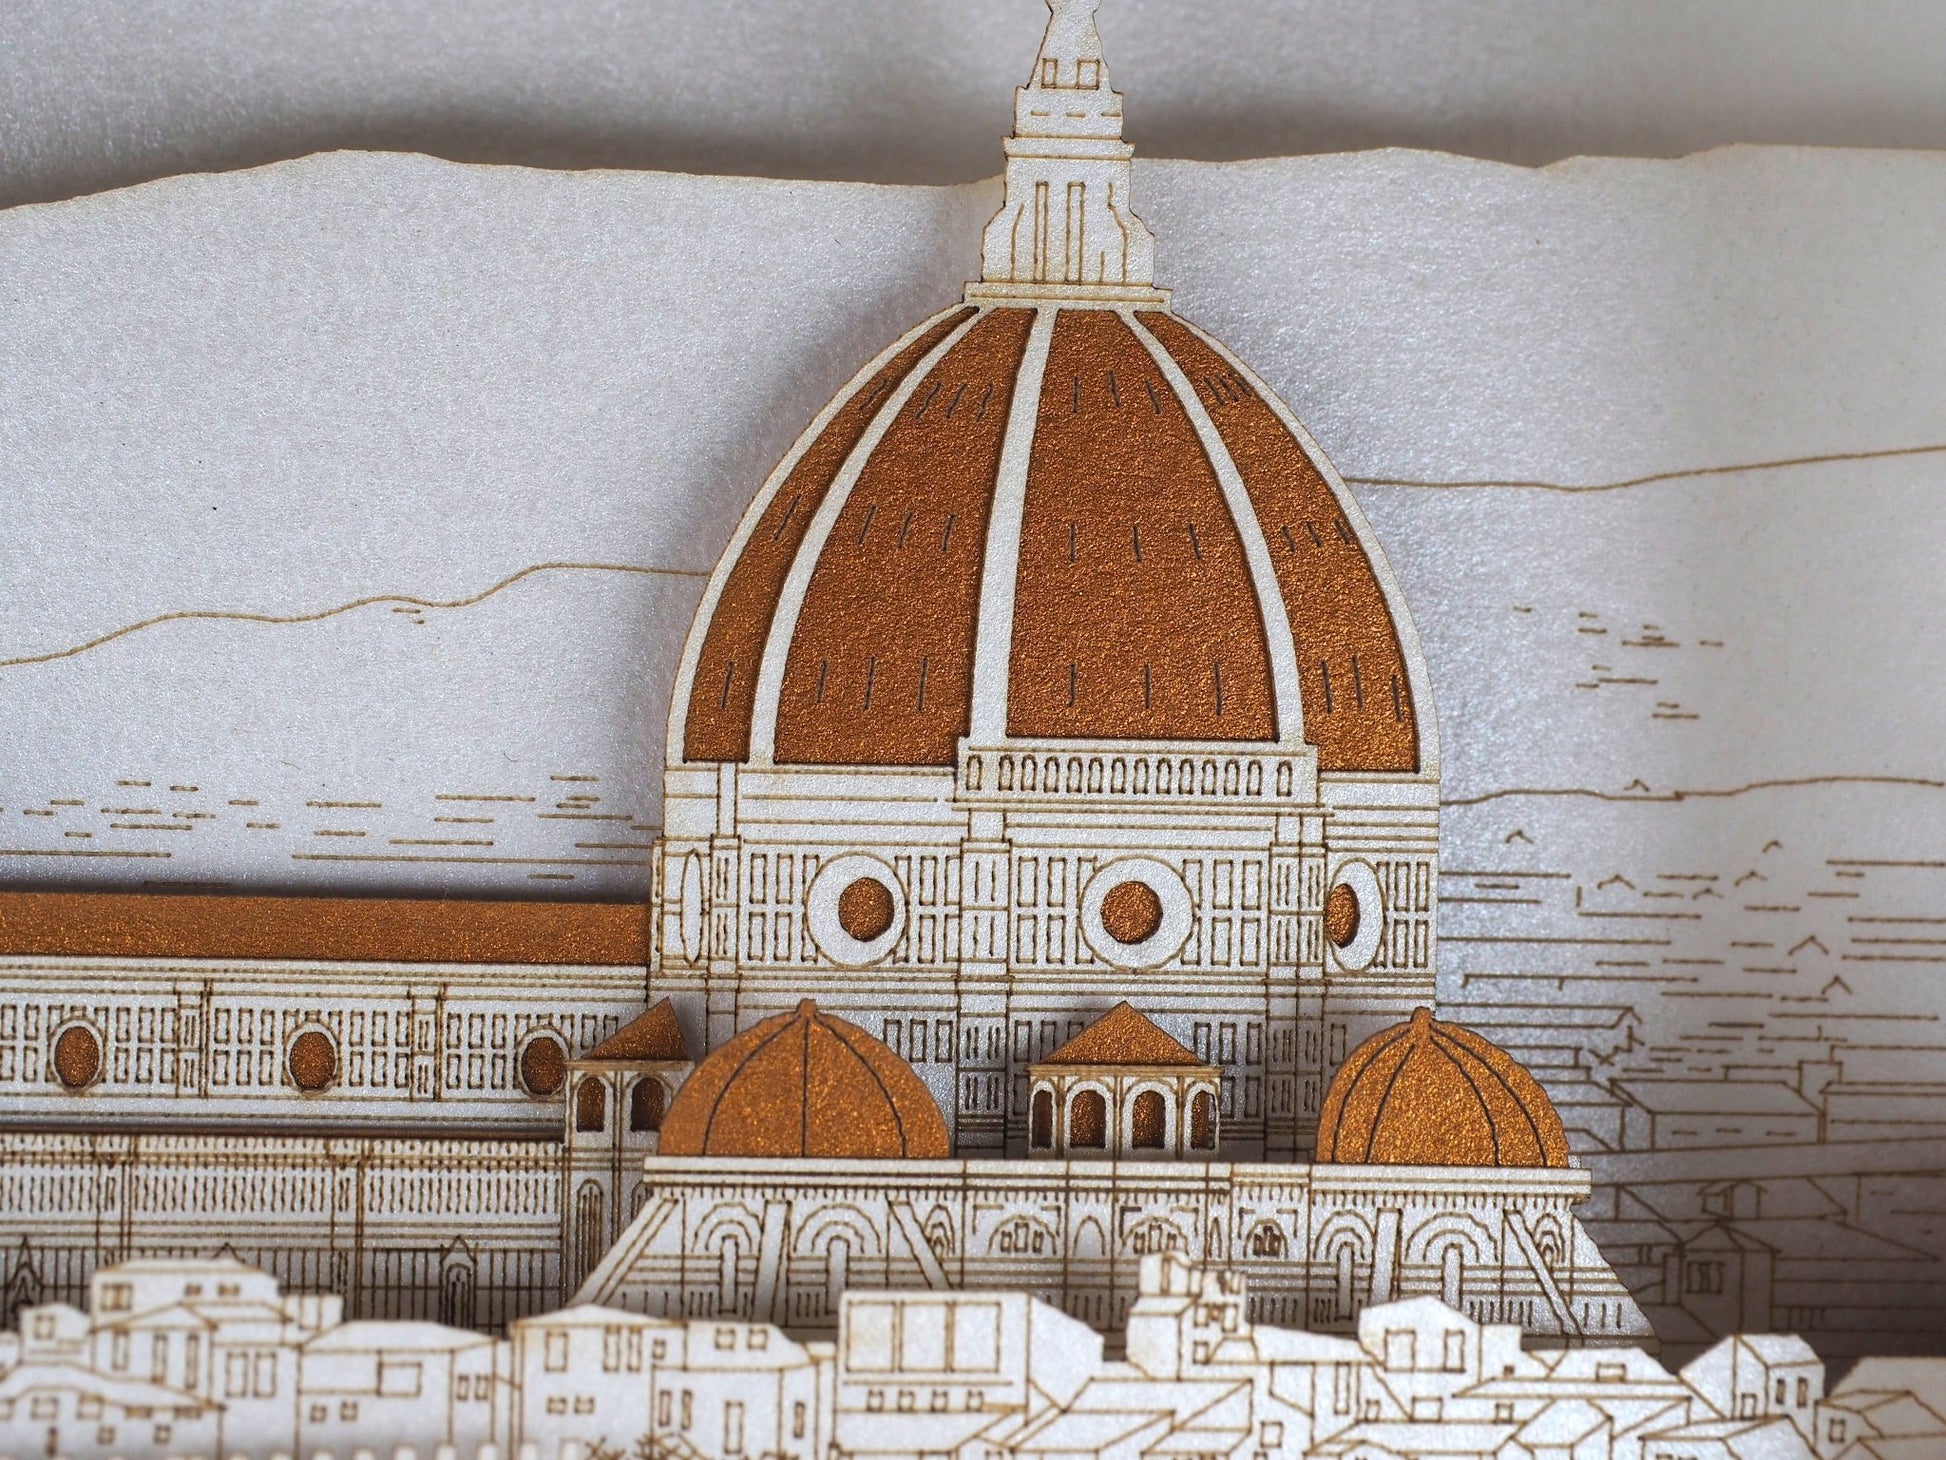 Italy, Duomo Florence, Cathedral of Saint Mary of the Flower Greeting popup card - ColibriGift